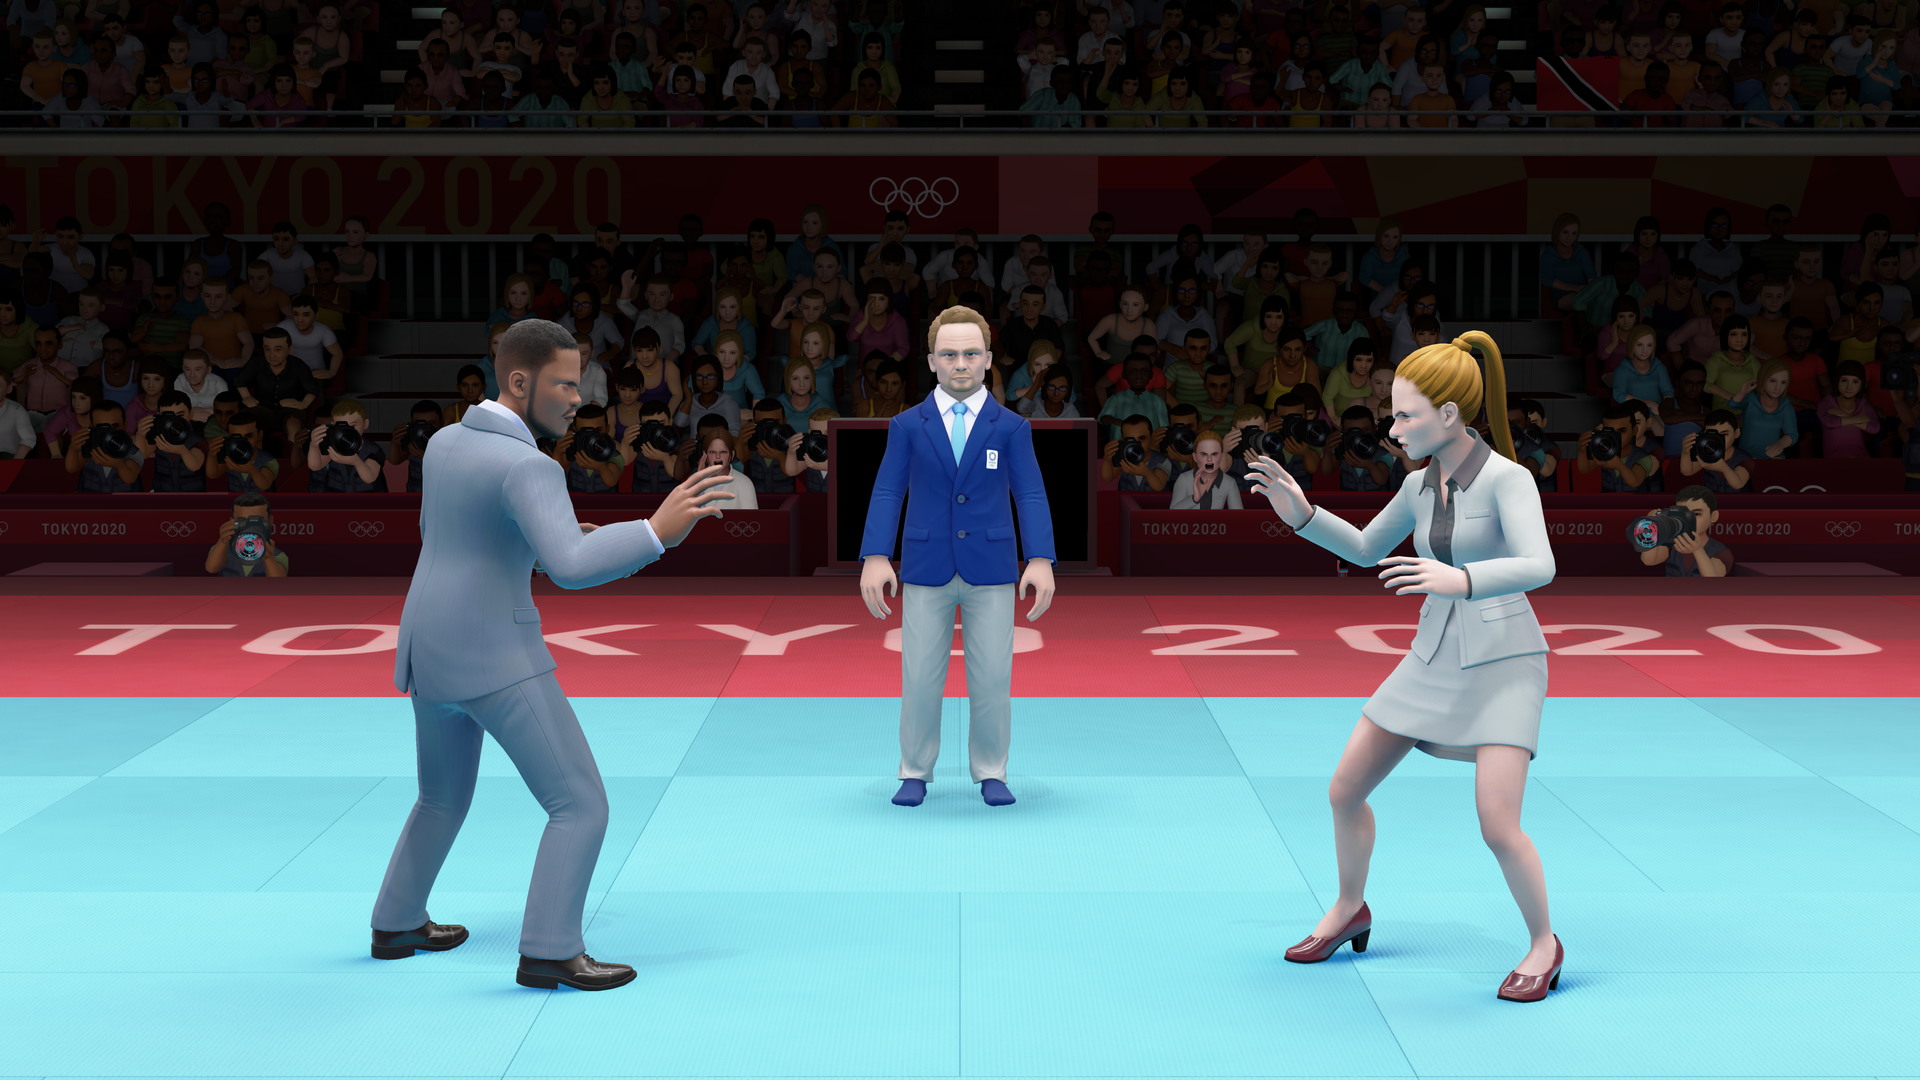 Olympic Games Tokyo 2020 - The Official Video Game - screenshot 19